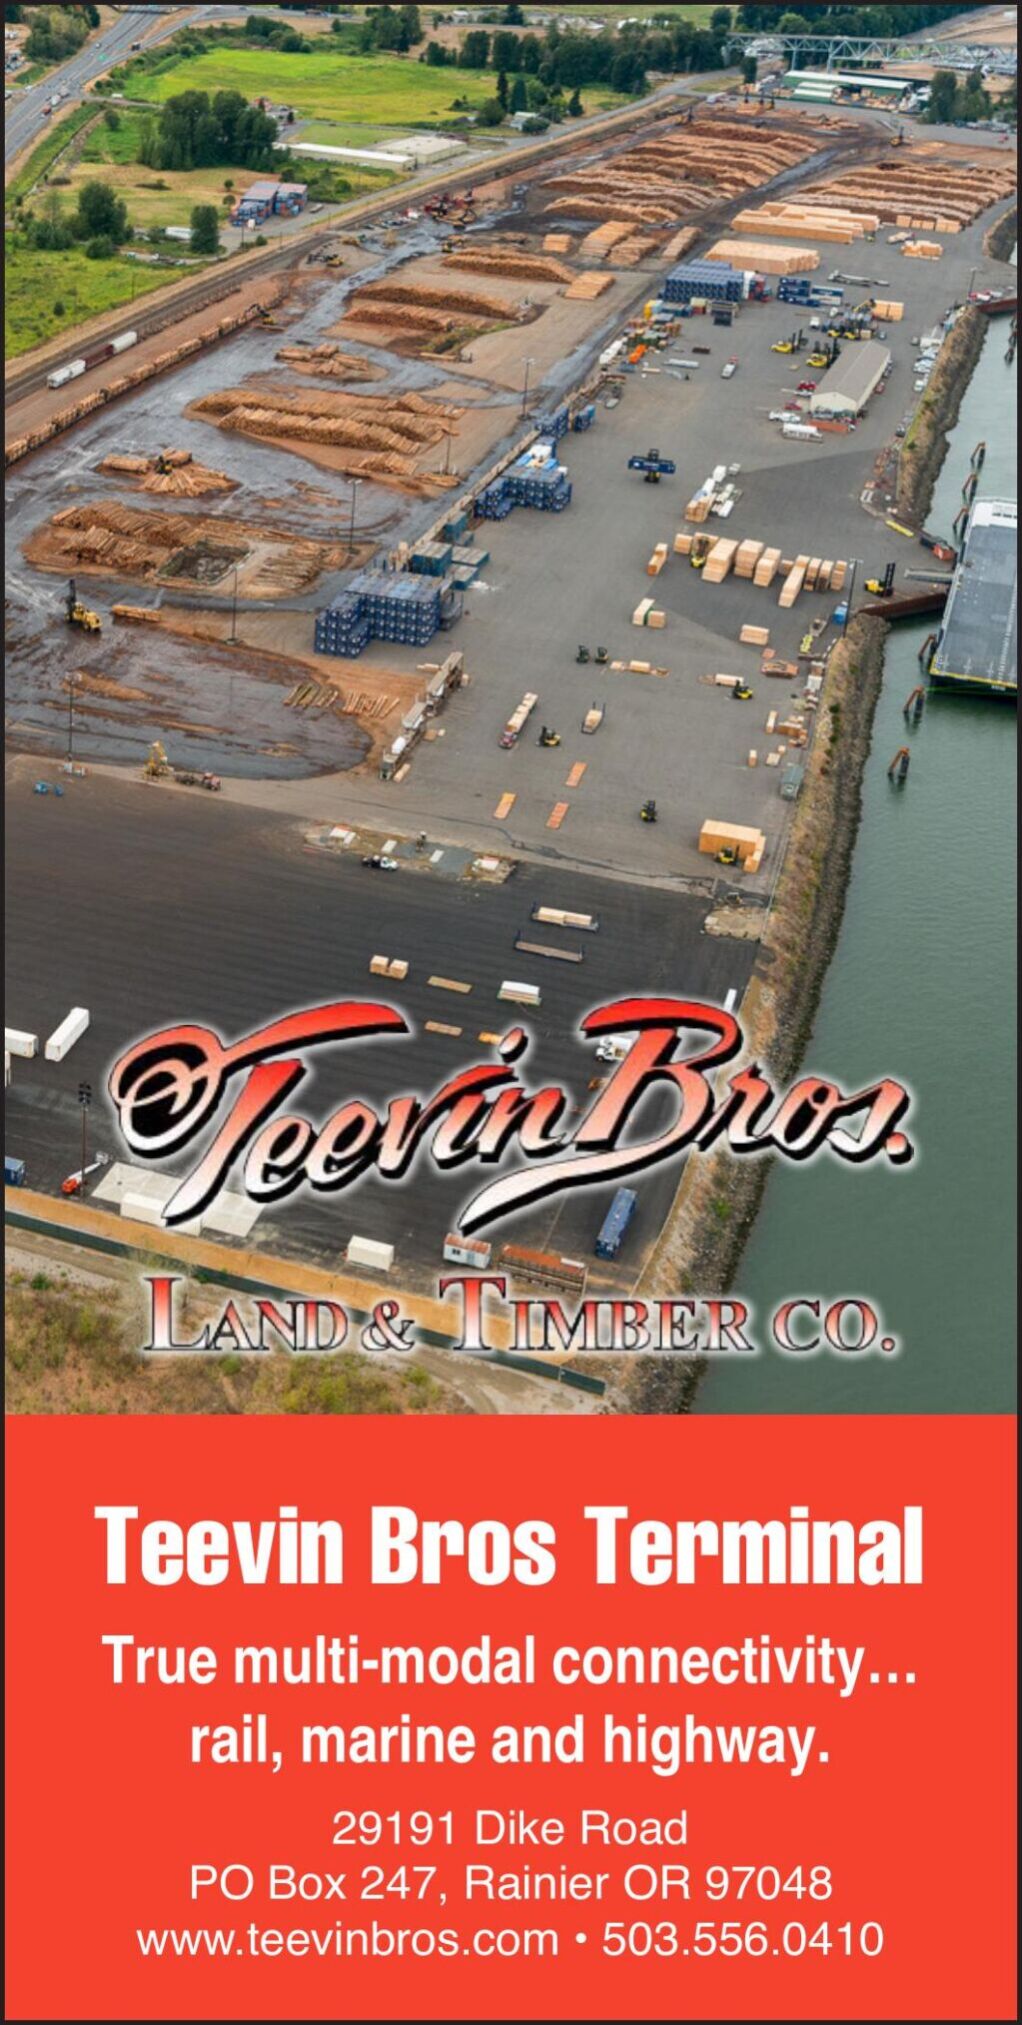 Teevin Bros Land and Timber